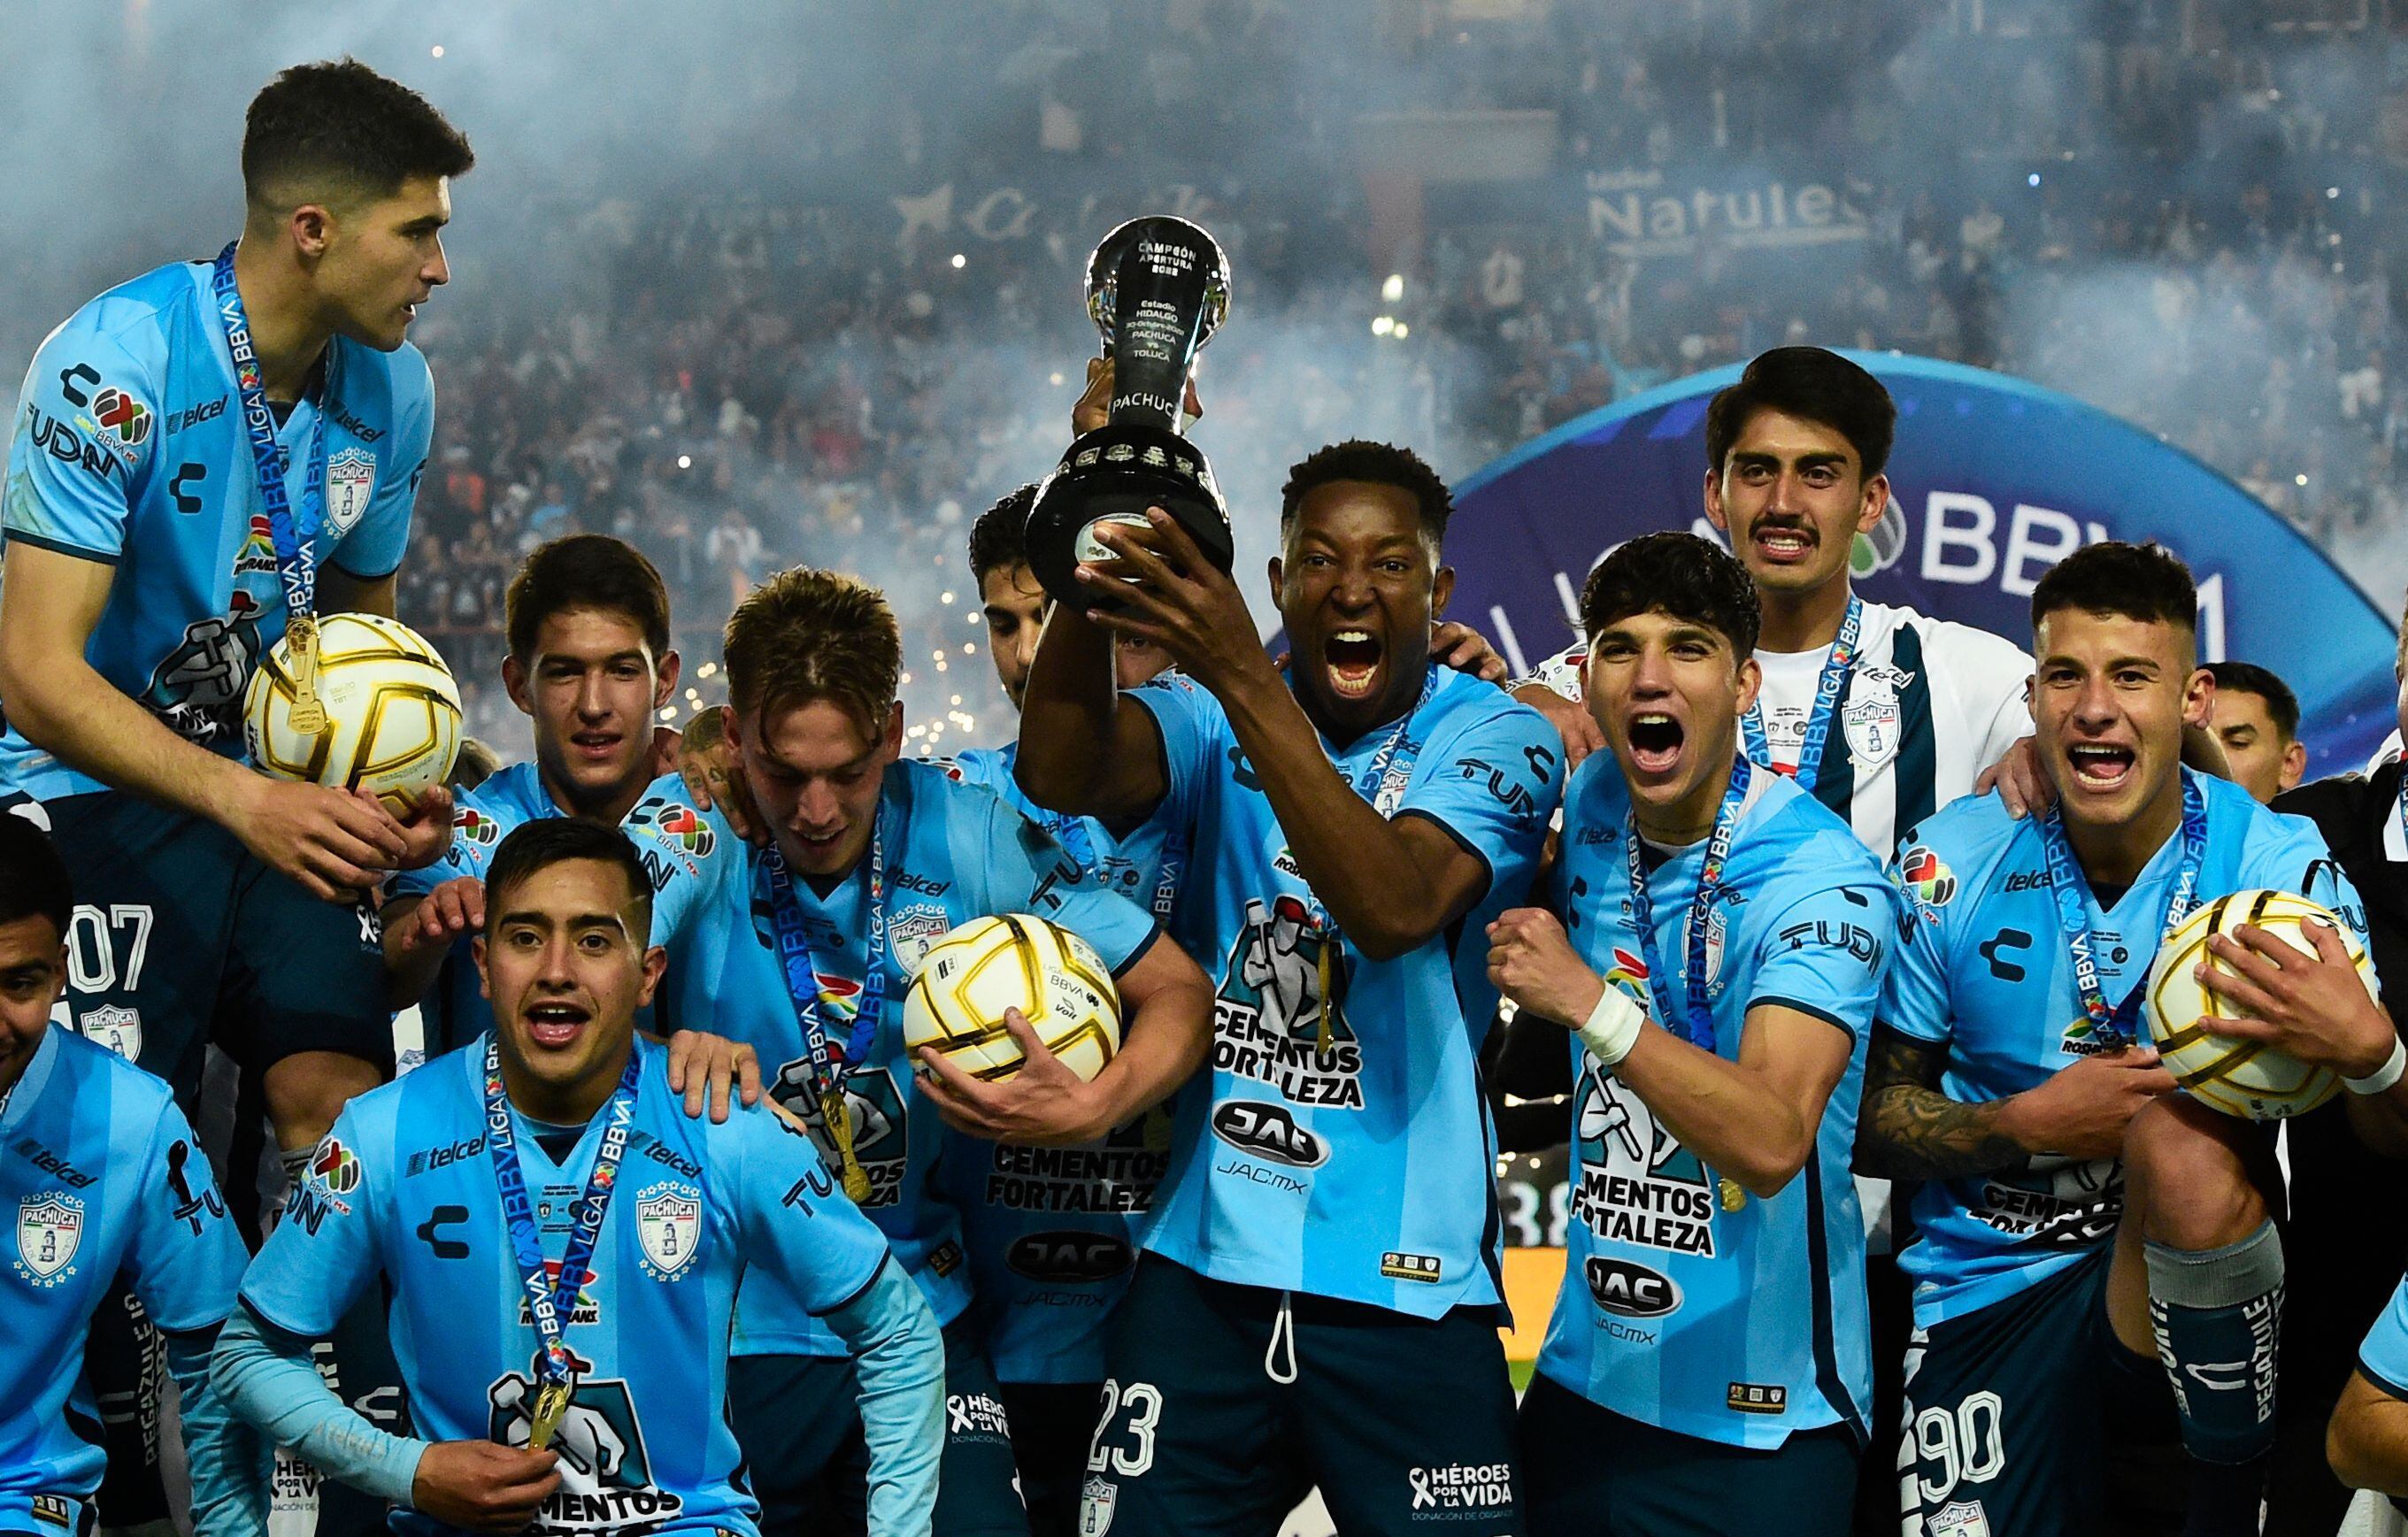 Pachuca's players celebrate after winning the Mexican Apertura 2022 tournament final football match against Toluca at Hidalgo stadium in Pachuca, Hidalgo State, Mexico, on October 30, 2022. (Photo by CLAUDIO CRUZ / AFP)